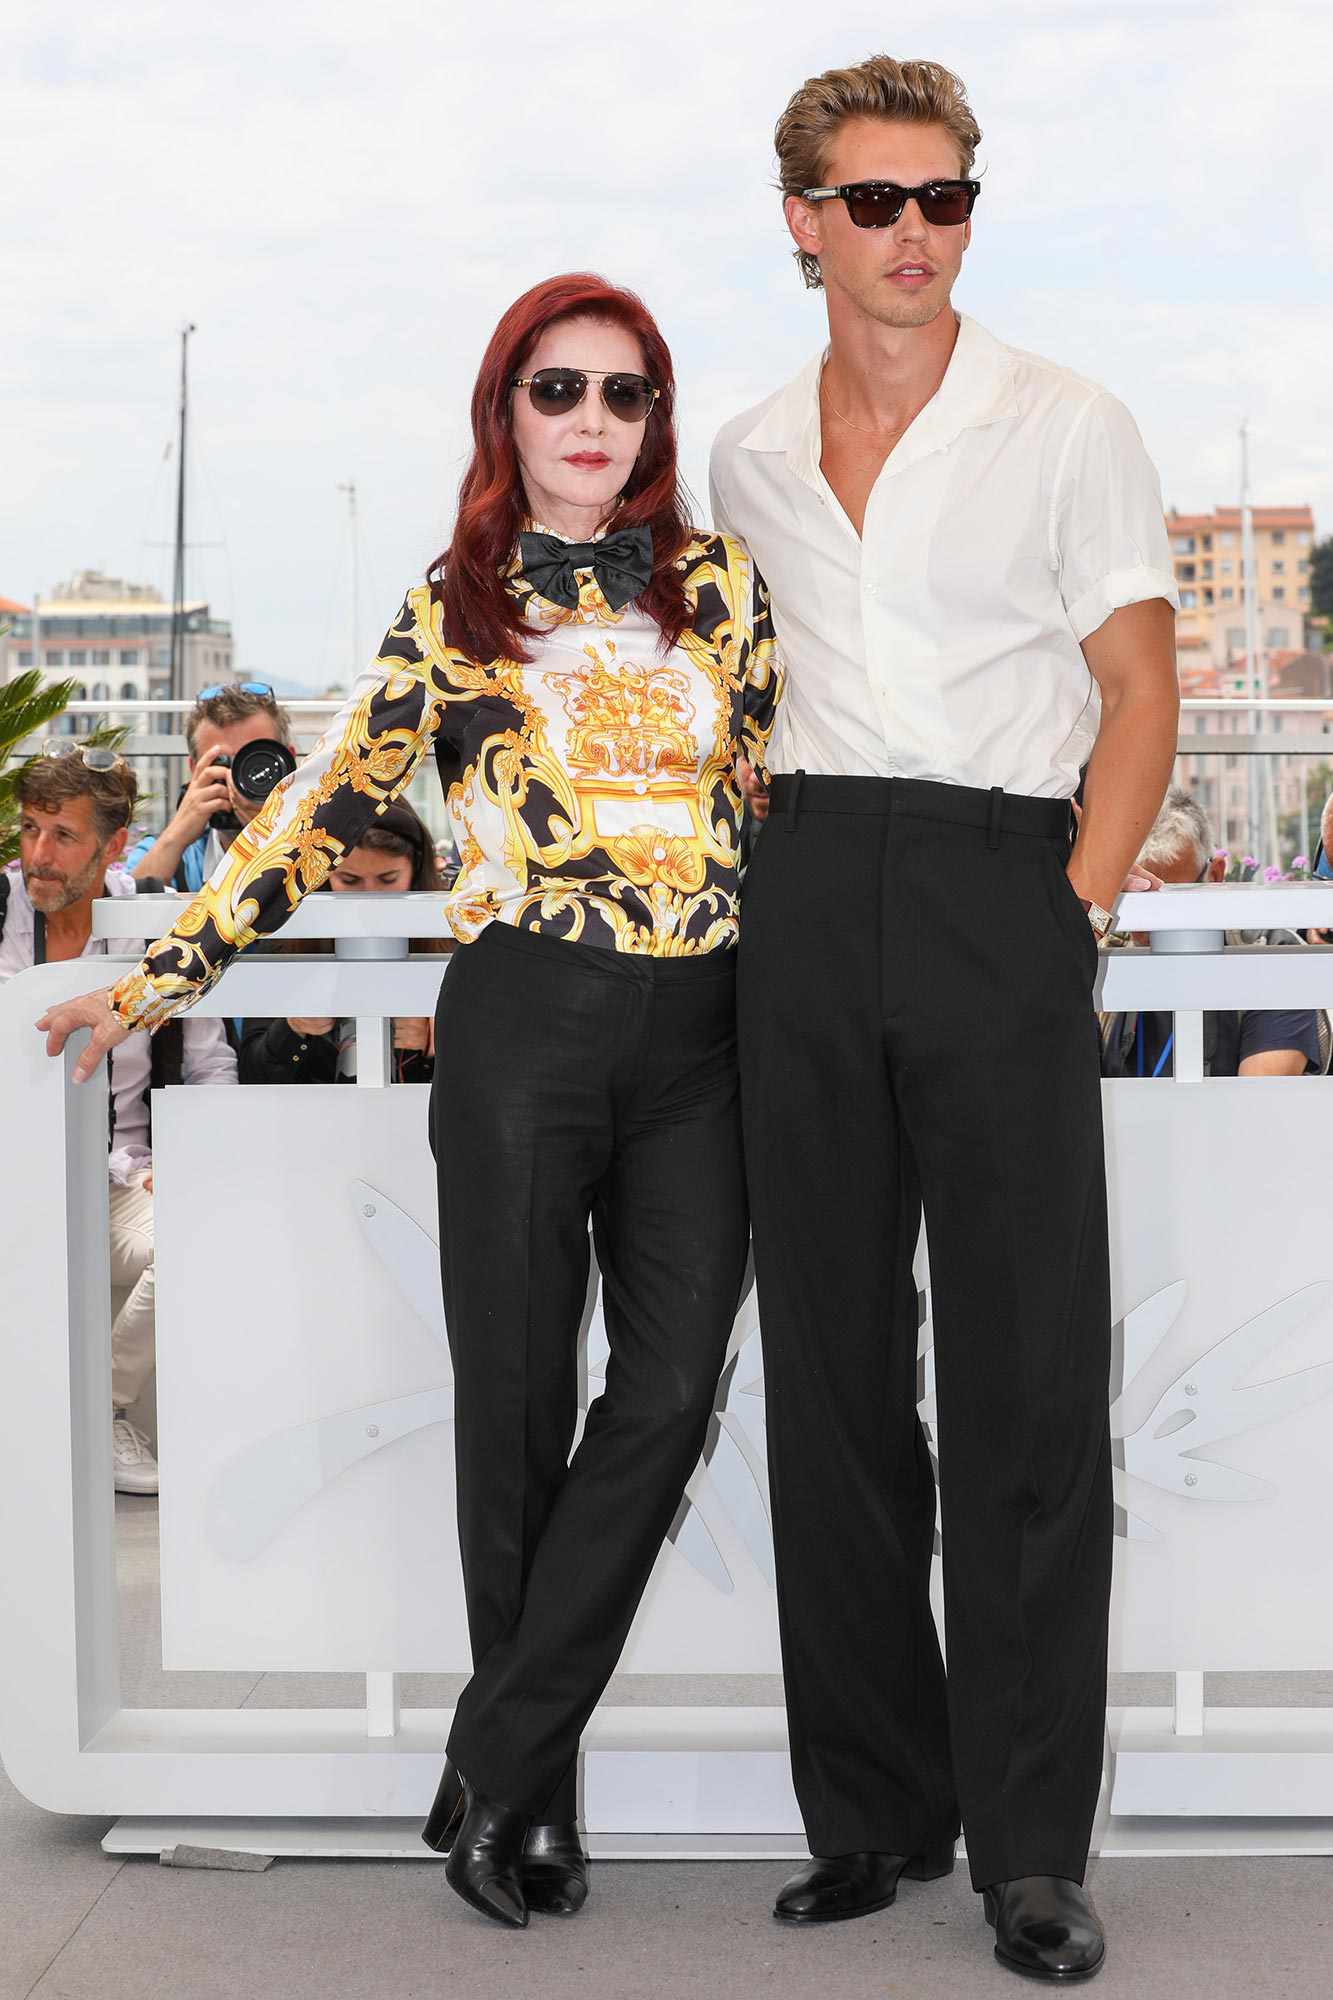 Priscilla Presley and Austin Butler attend the photocall for "Elvis" during the 75th annual Cannes film festival at Palais des Festivals on May 26, 2022 in Cannes, France.